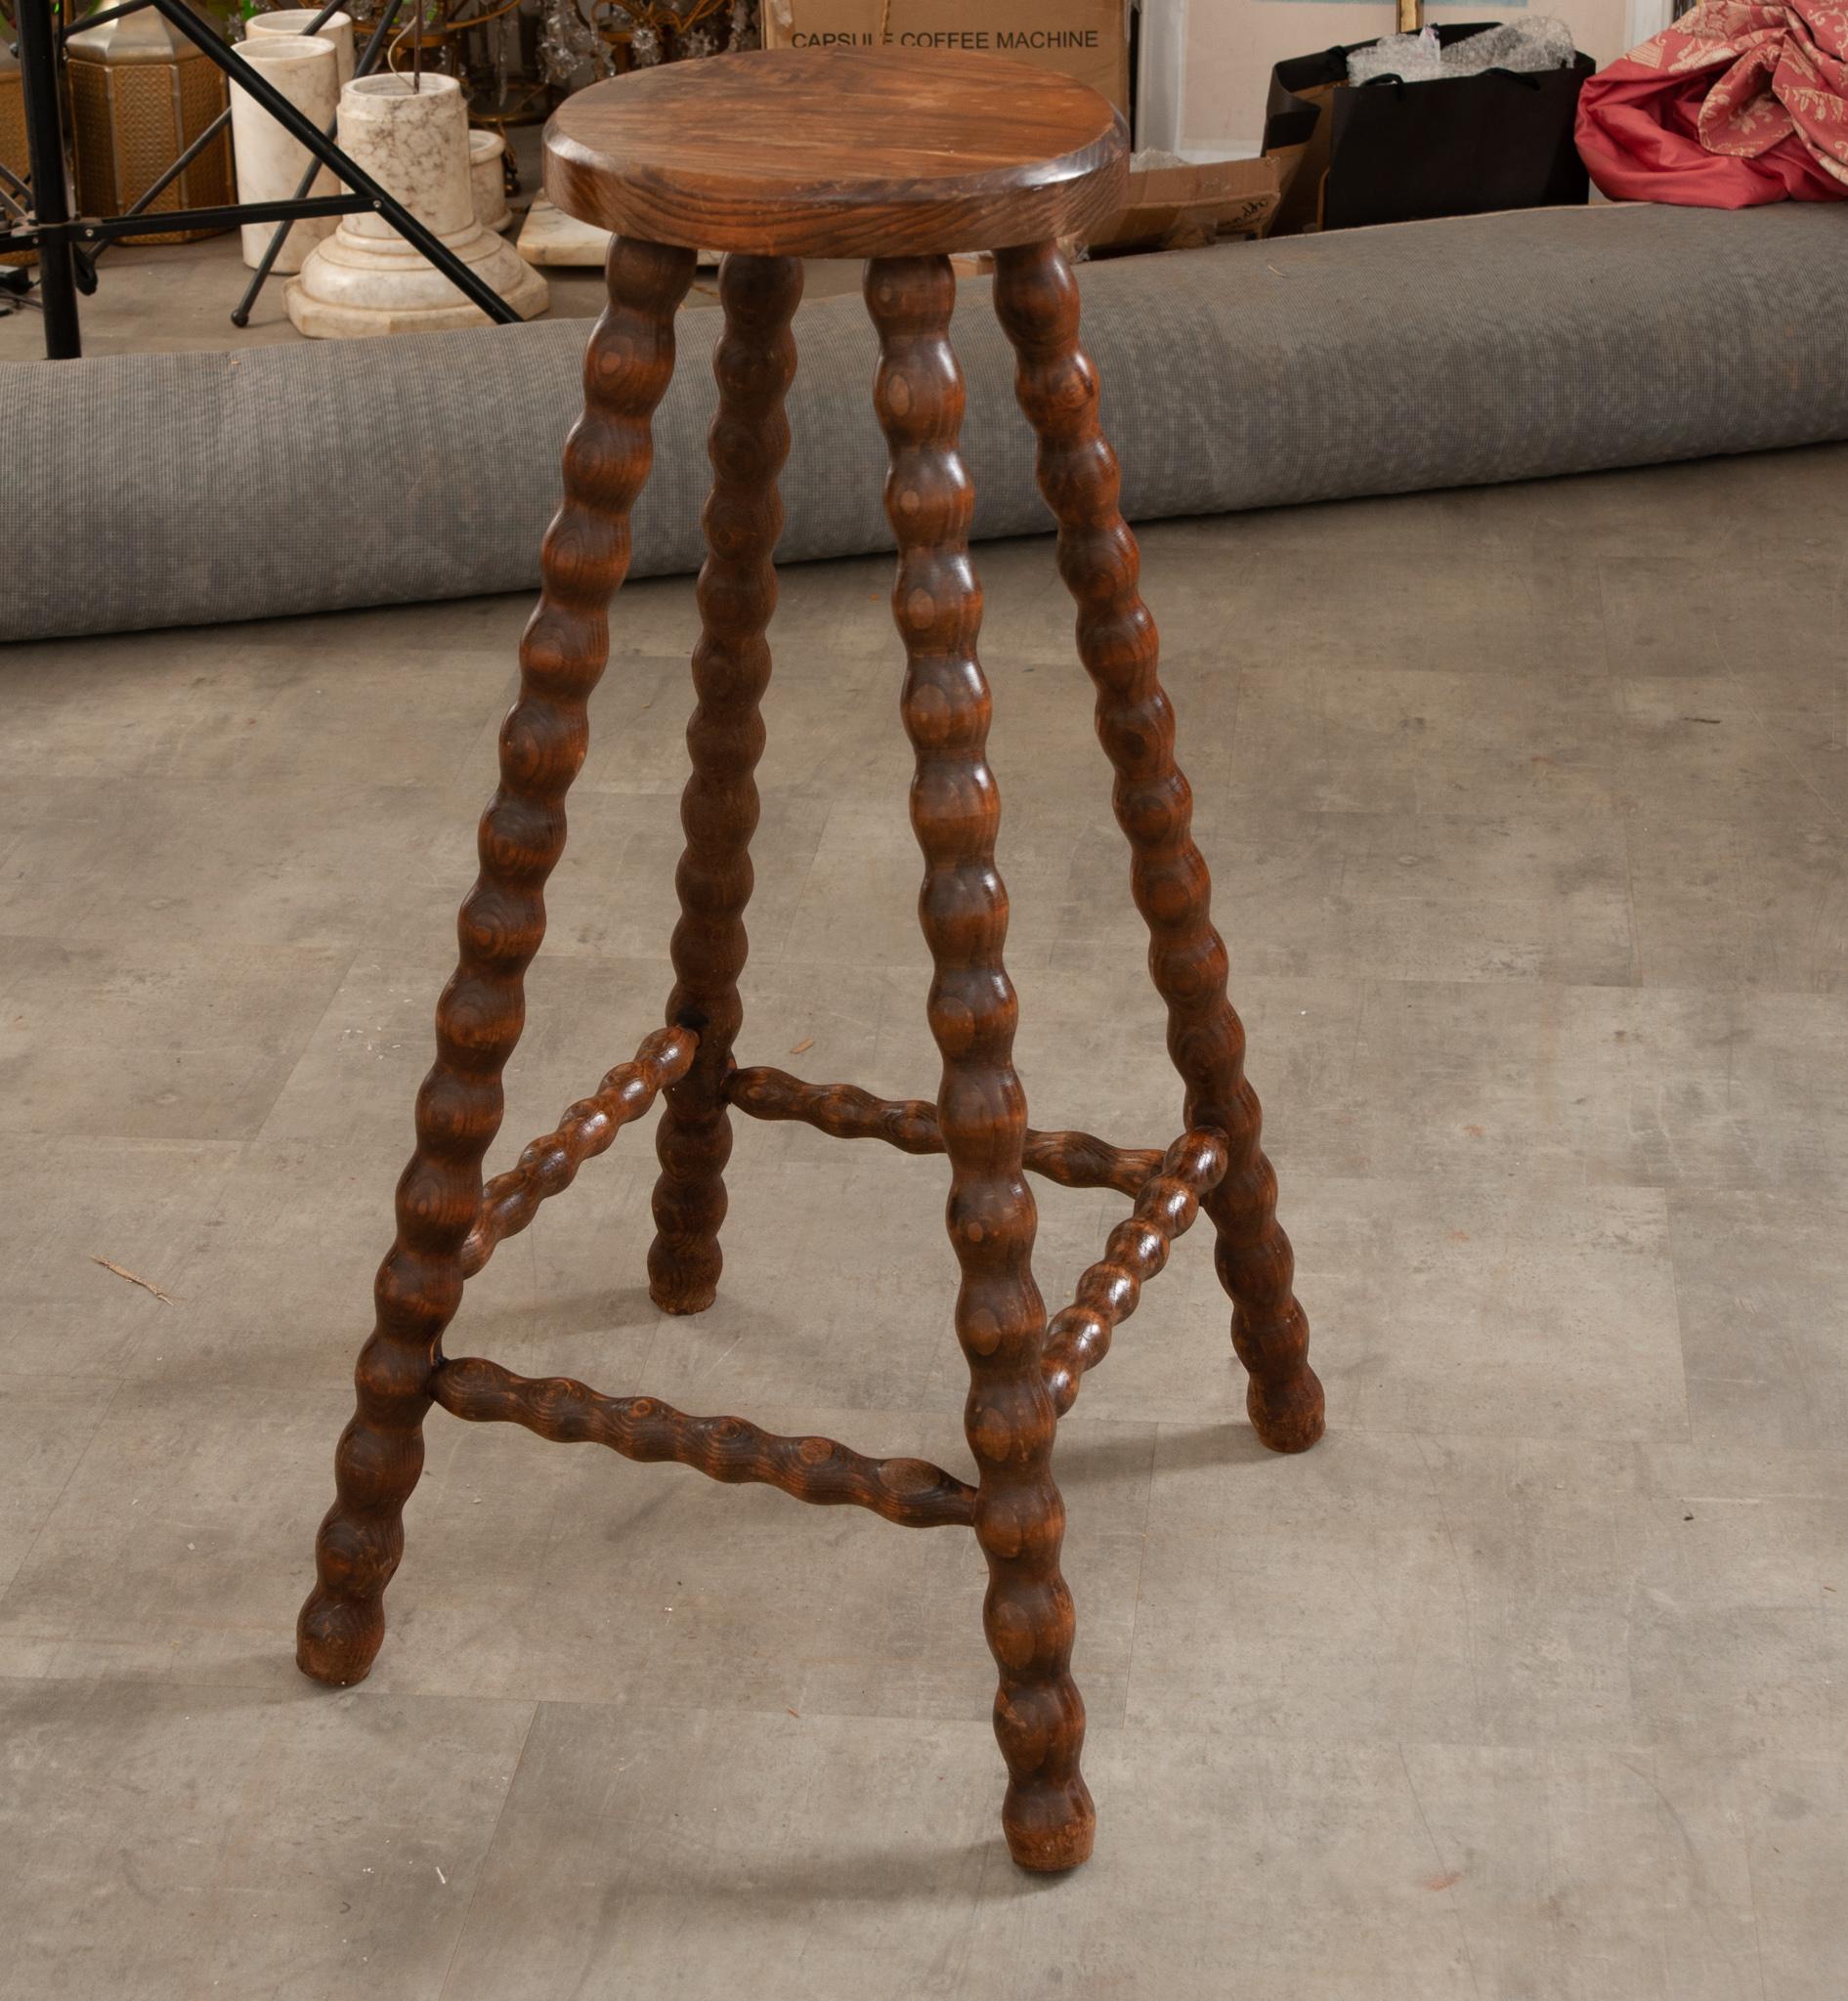 A tall French bar stool or table has playful bobbin oak legs with a stretcher base. Would work well as a plant stand or taller table. Cleaned and polished with a French paste wax, this stool is ready for your immediate use.  Be sure to view all the